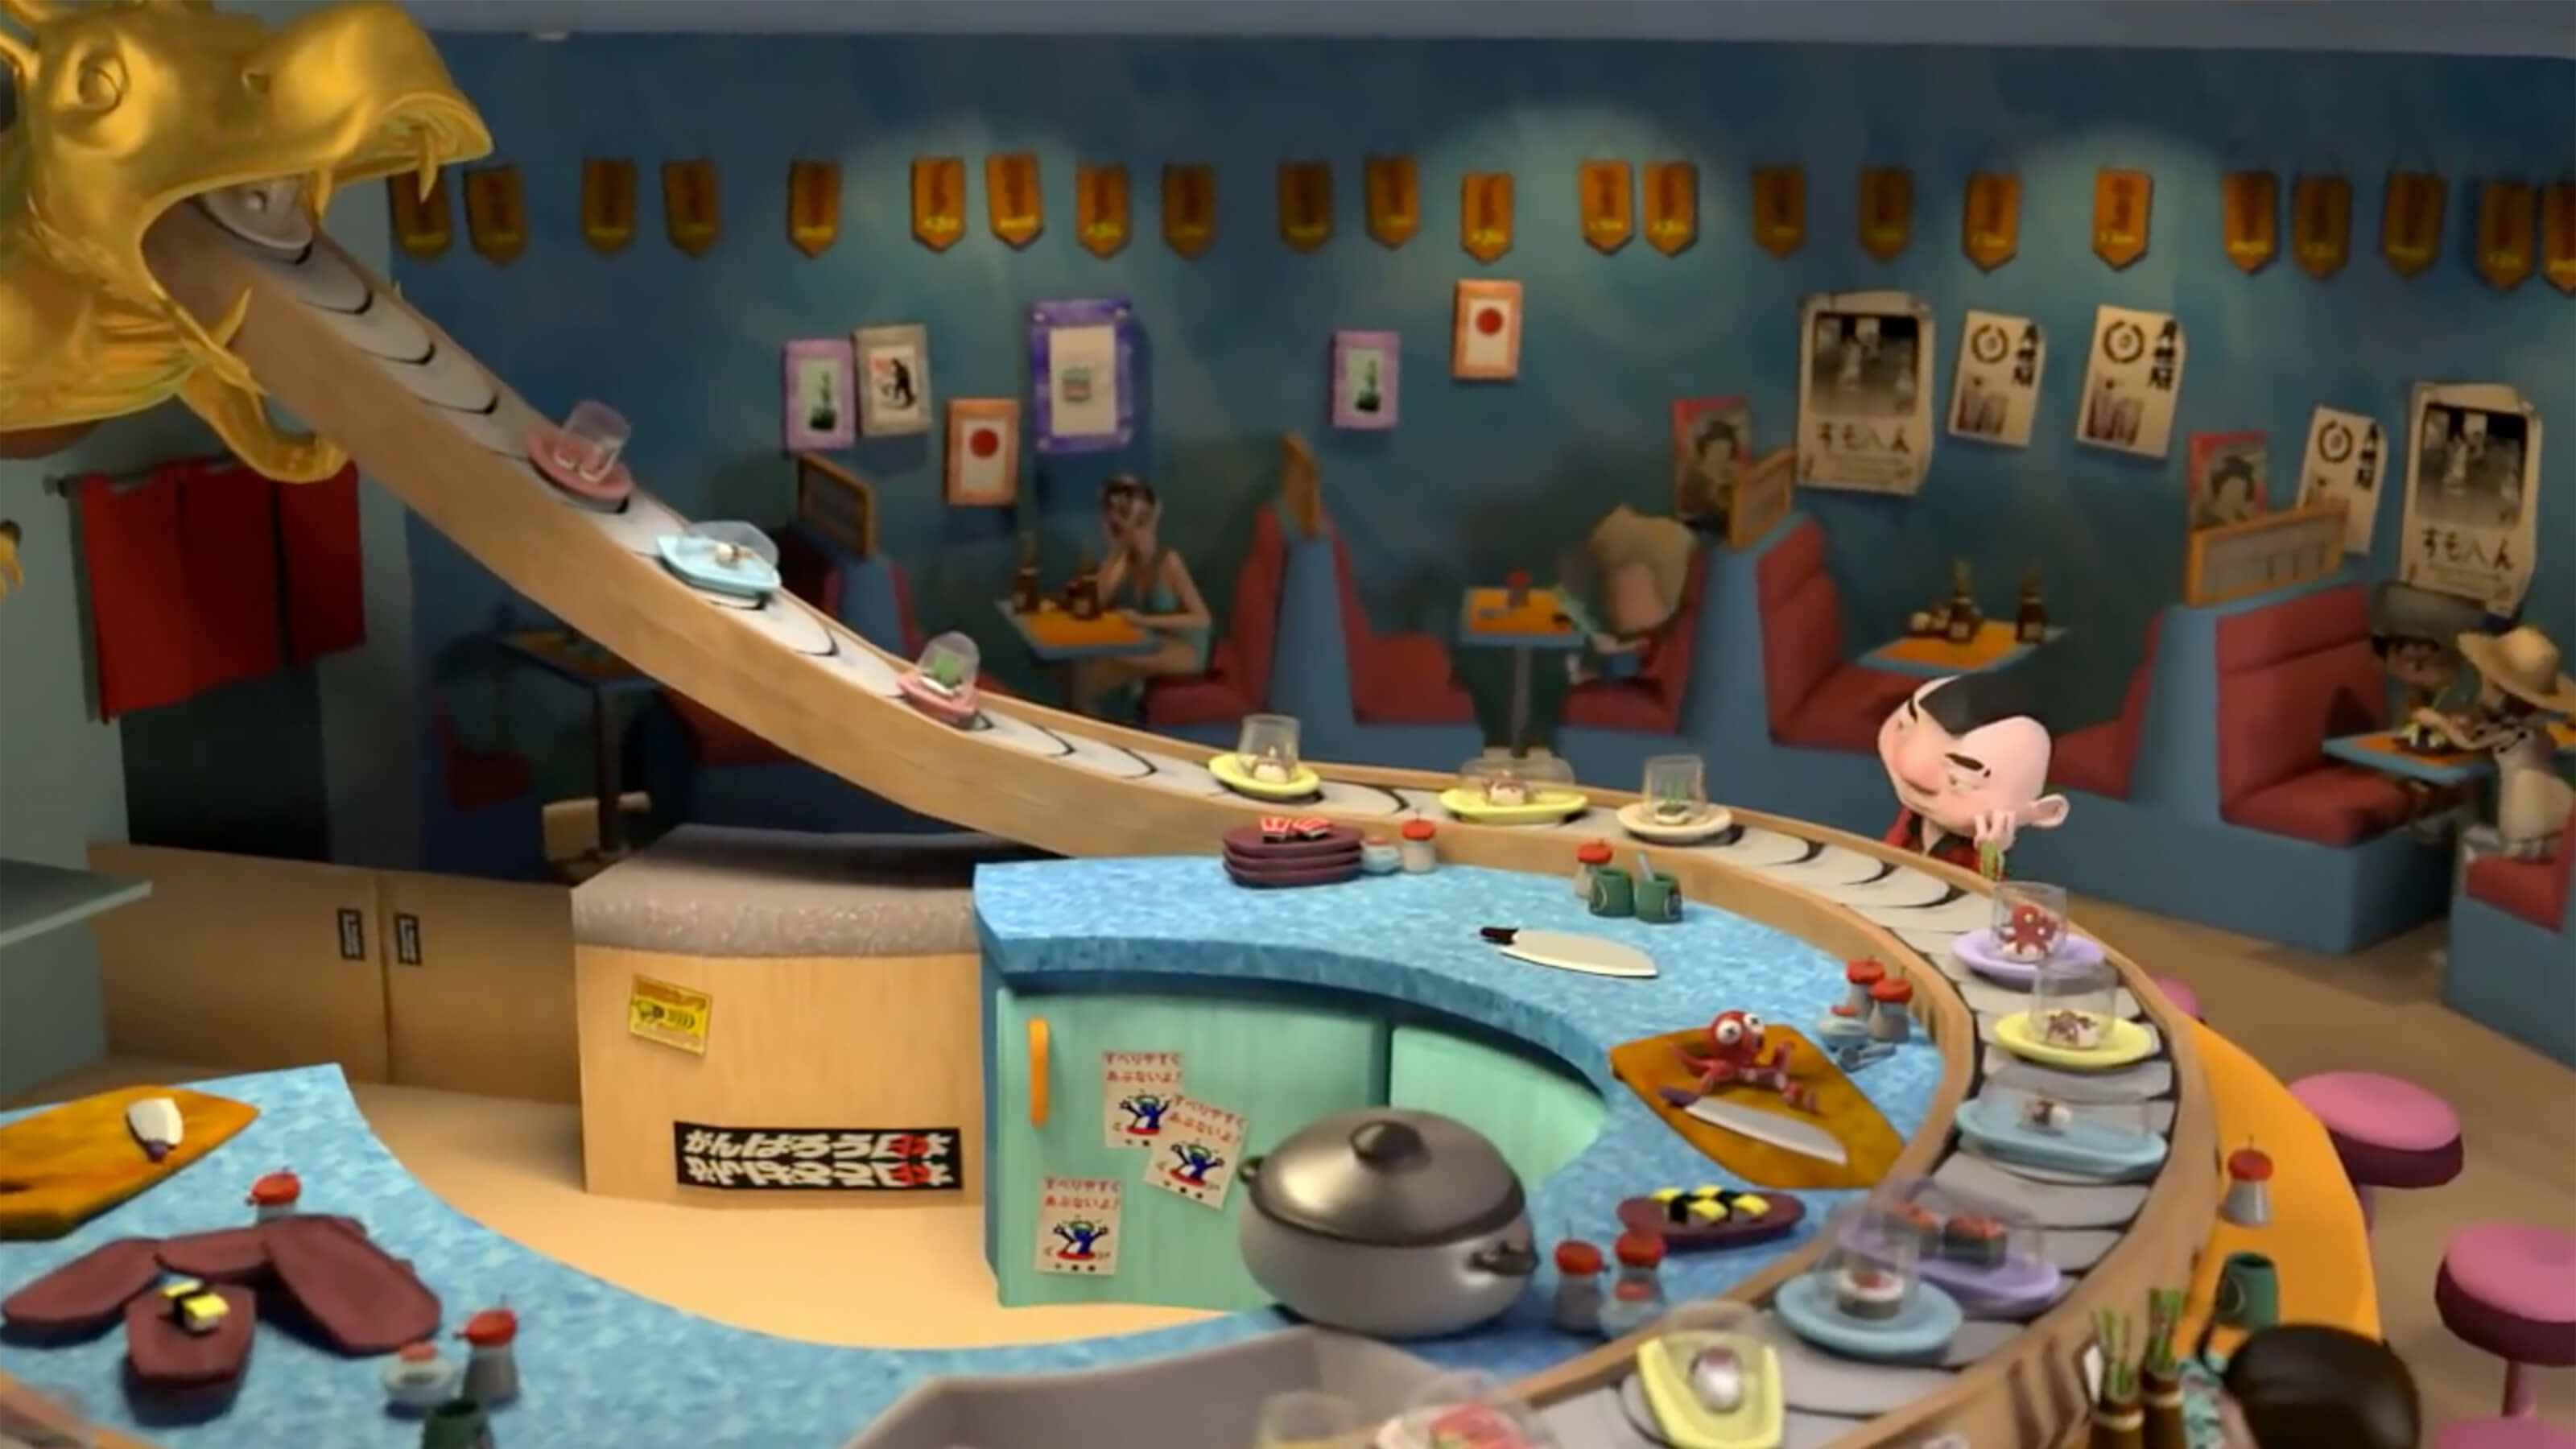 In a colorful CG animated scene, a short, bored man stares at incoming plates at a conveyor sushi restaurant.